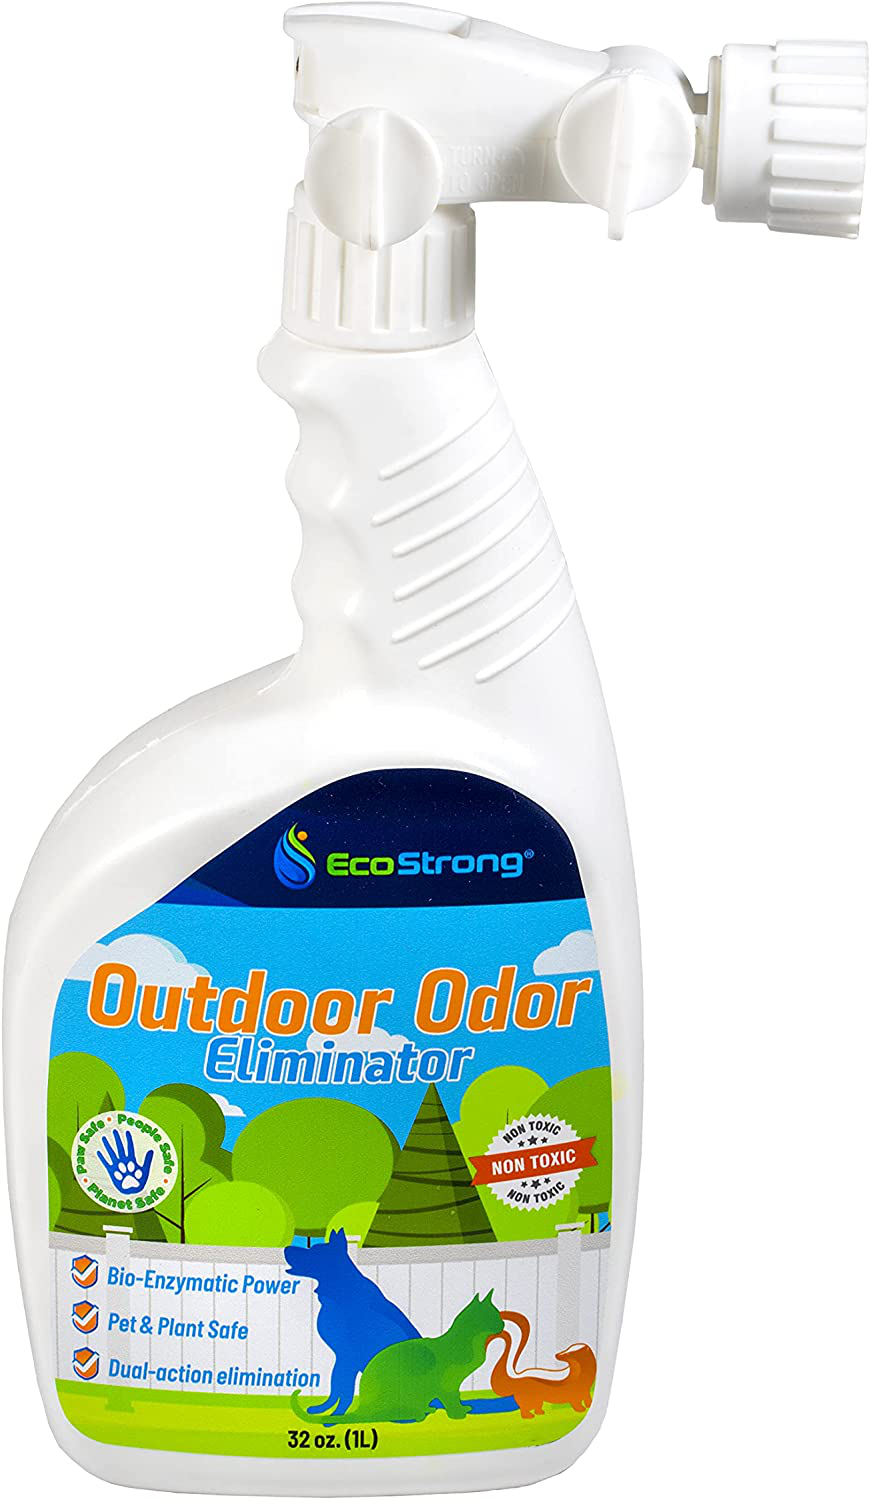 Eco Strong Outdoor Odor Eliminator | outside Dog Urine Enzyme Cleaner – Powerful Pet, Cat, Animal Scent Deodorizer | Professional Strength for Yard, Turf, Kennels, Patios, Decks